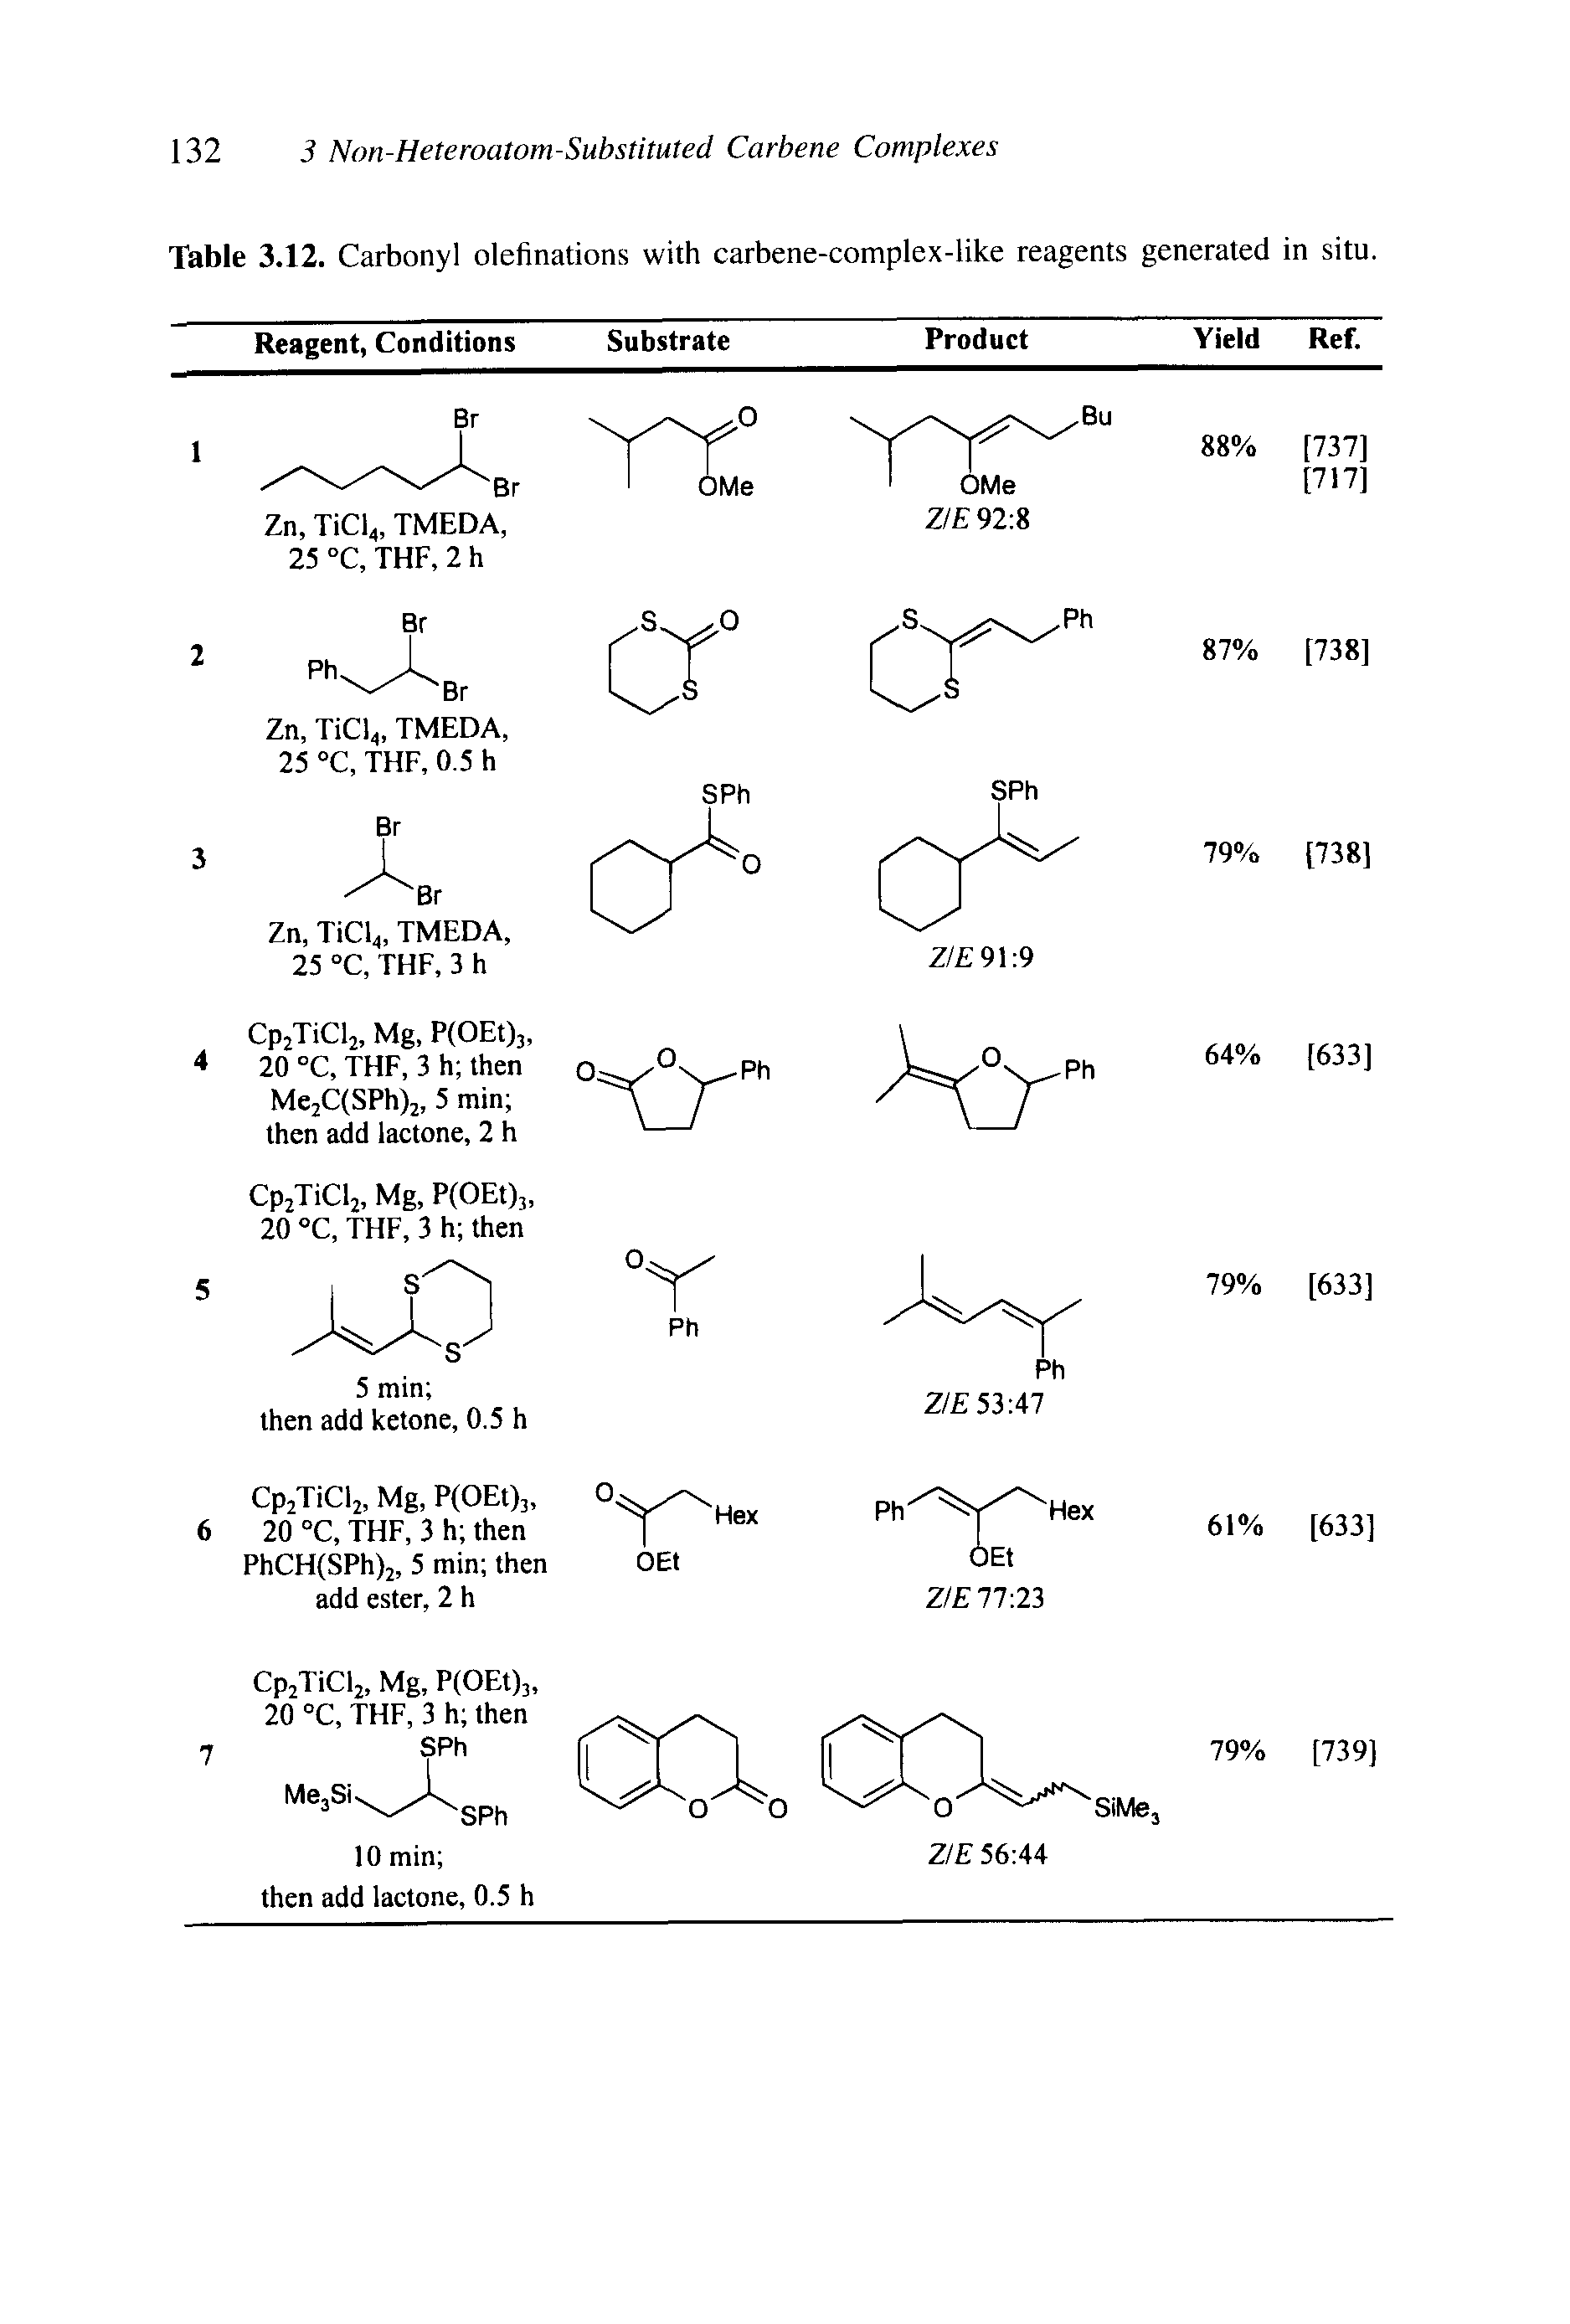 Table 3.12. Carbonyl olefinations with carbene-complex-like reagents generated in situ.